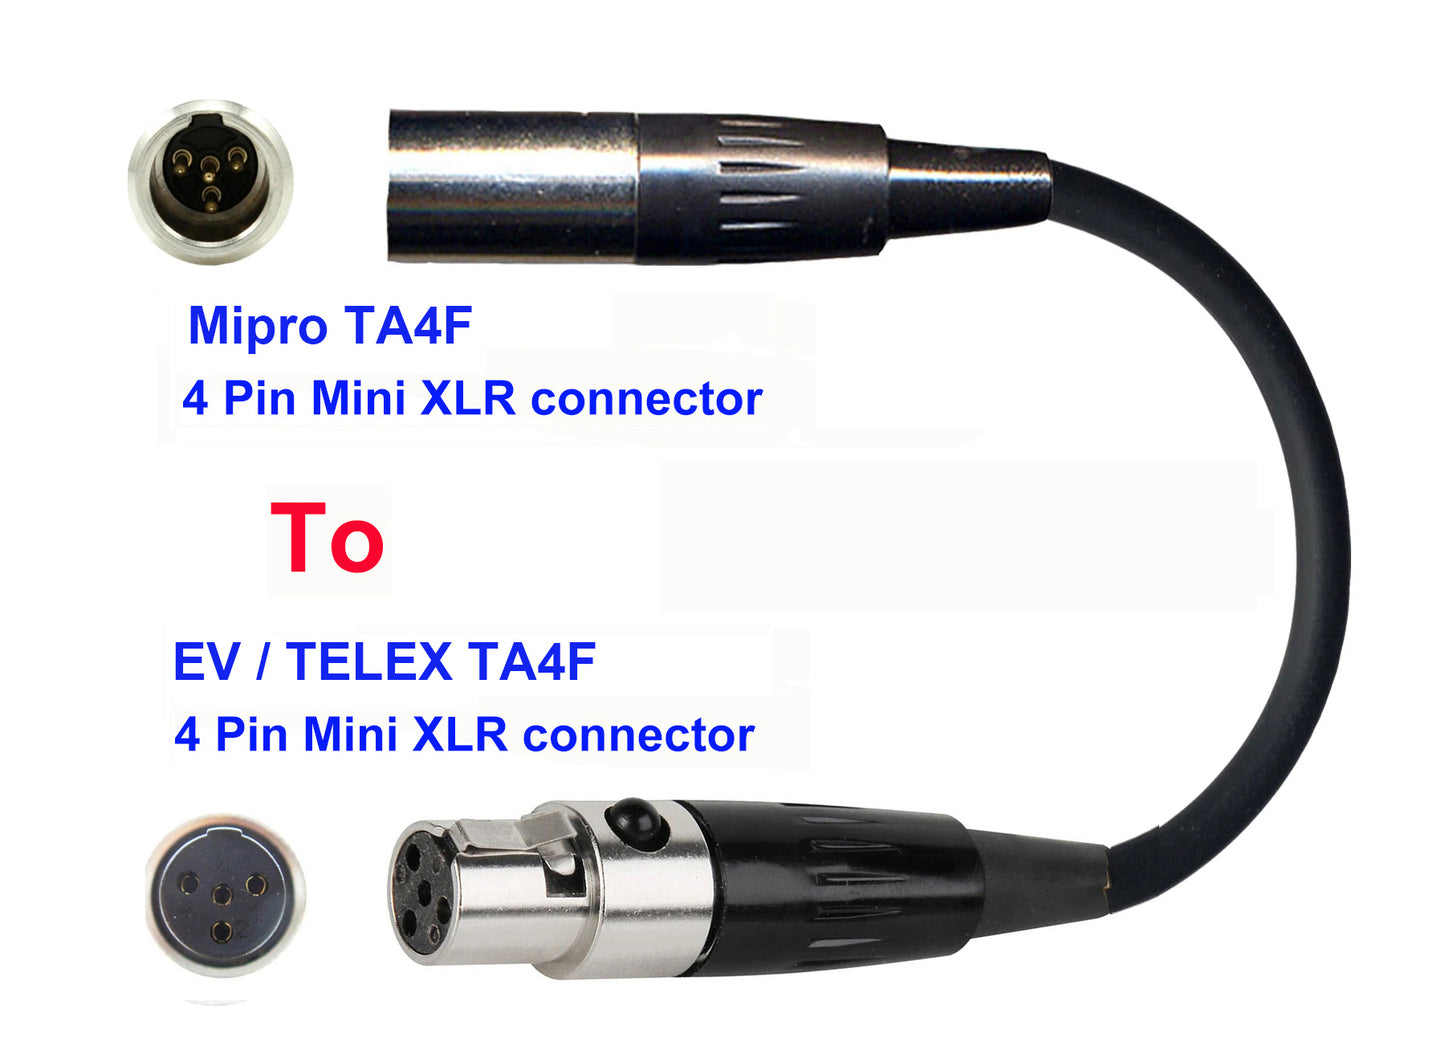 Microphone Adapter - Mipro Microphones with TA4F 4 pin mini XLR Locking connector TO EV / Telex Transmitters with 4 Pin TA4M connector